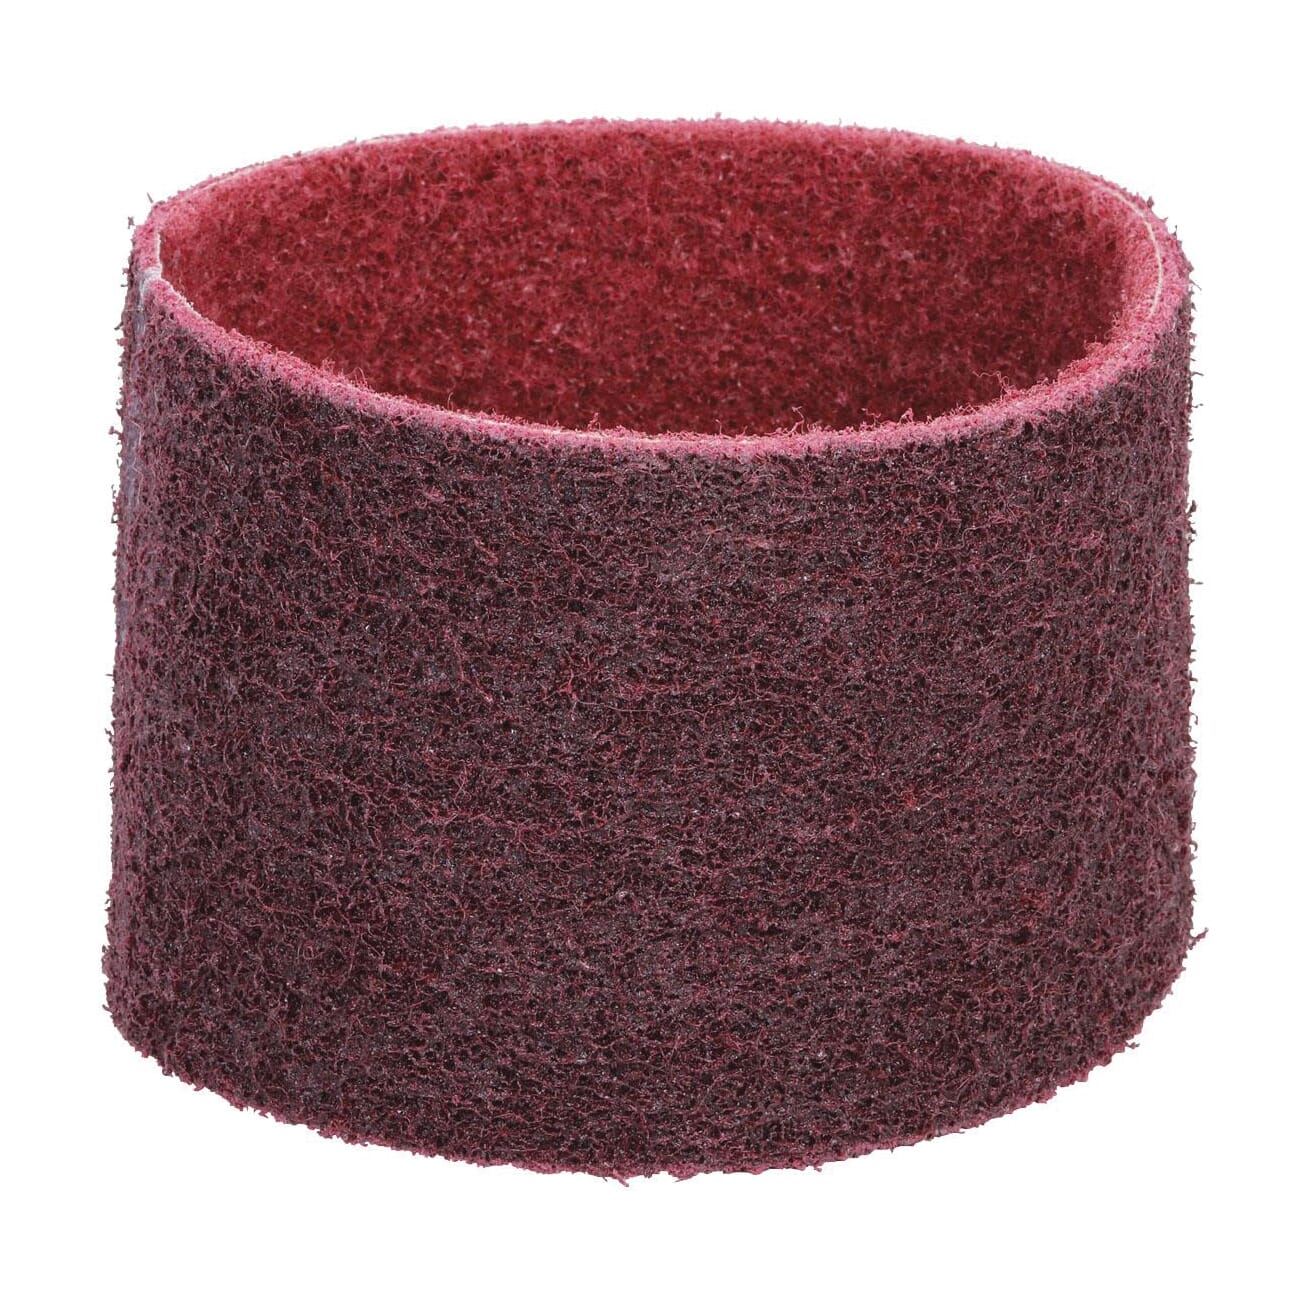 Dynabrade® DynaBrite® 90282 Premium Good Tier Expanding Drum Surface Conditioning Non-Woven Abrasive Belt, 3-1/2 in W x 15-1/2 in L, Medium Grade, Aluminum Oxide Abrasive, Maroon